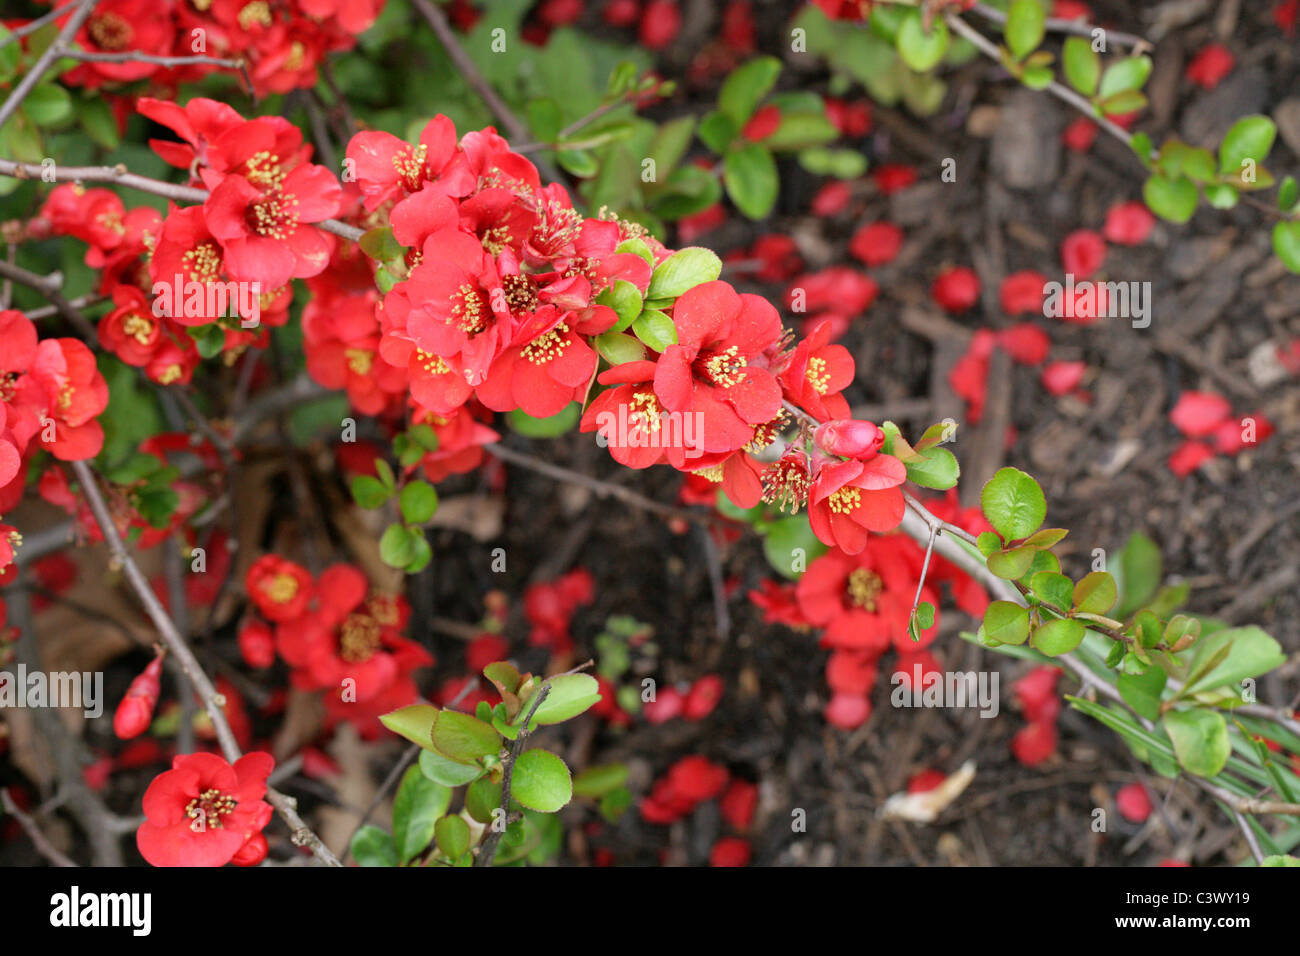 Japanese Quince or Flowering Quince, Chaenomeles x superba 'Crimson and Gold', Rosaceae. Stock Photo